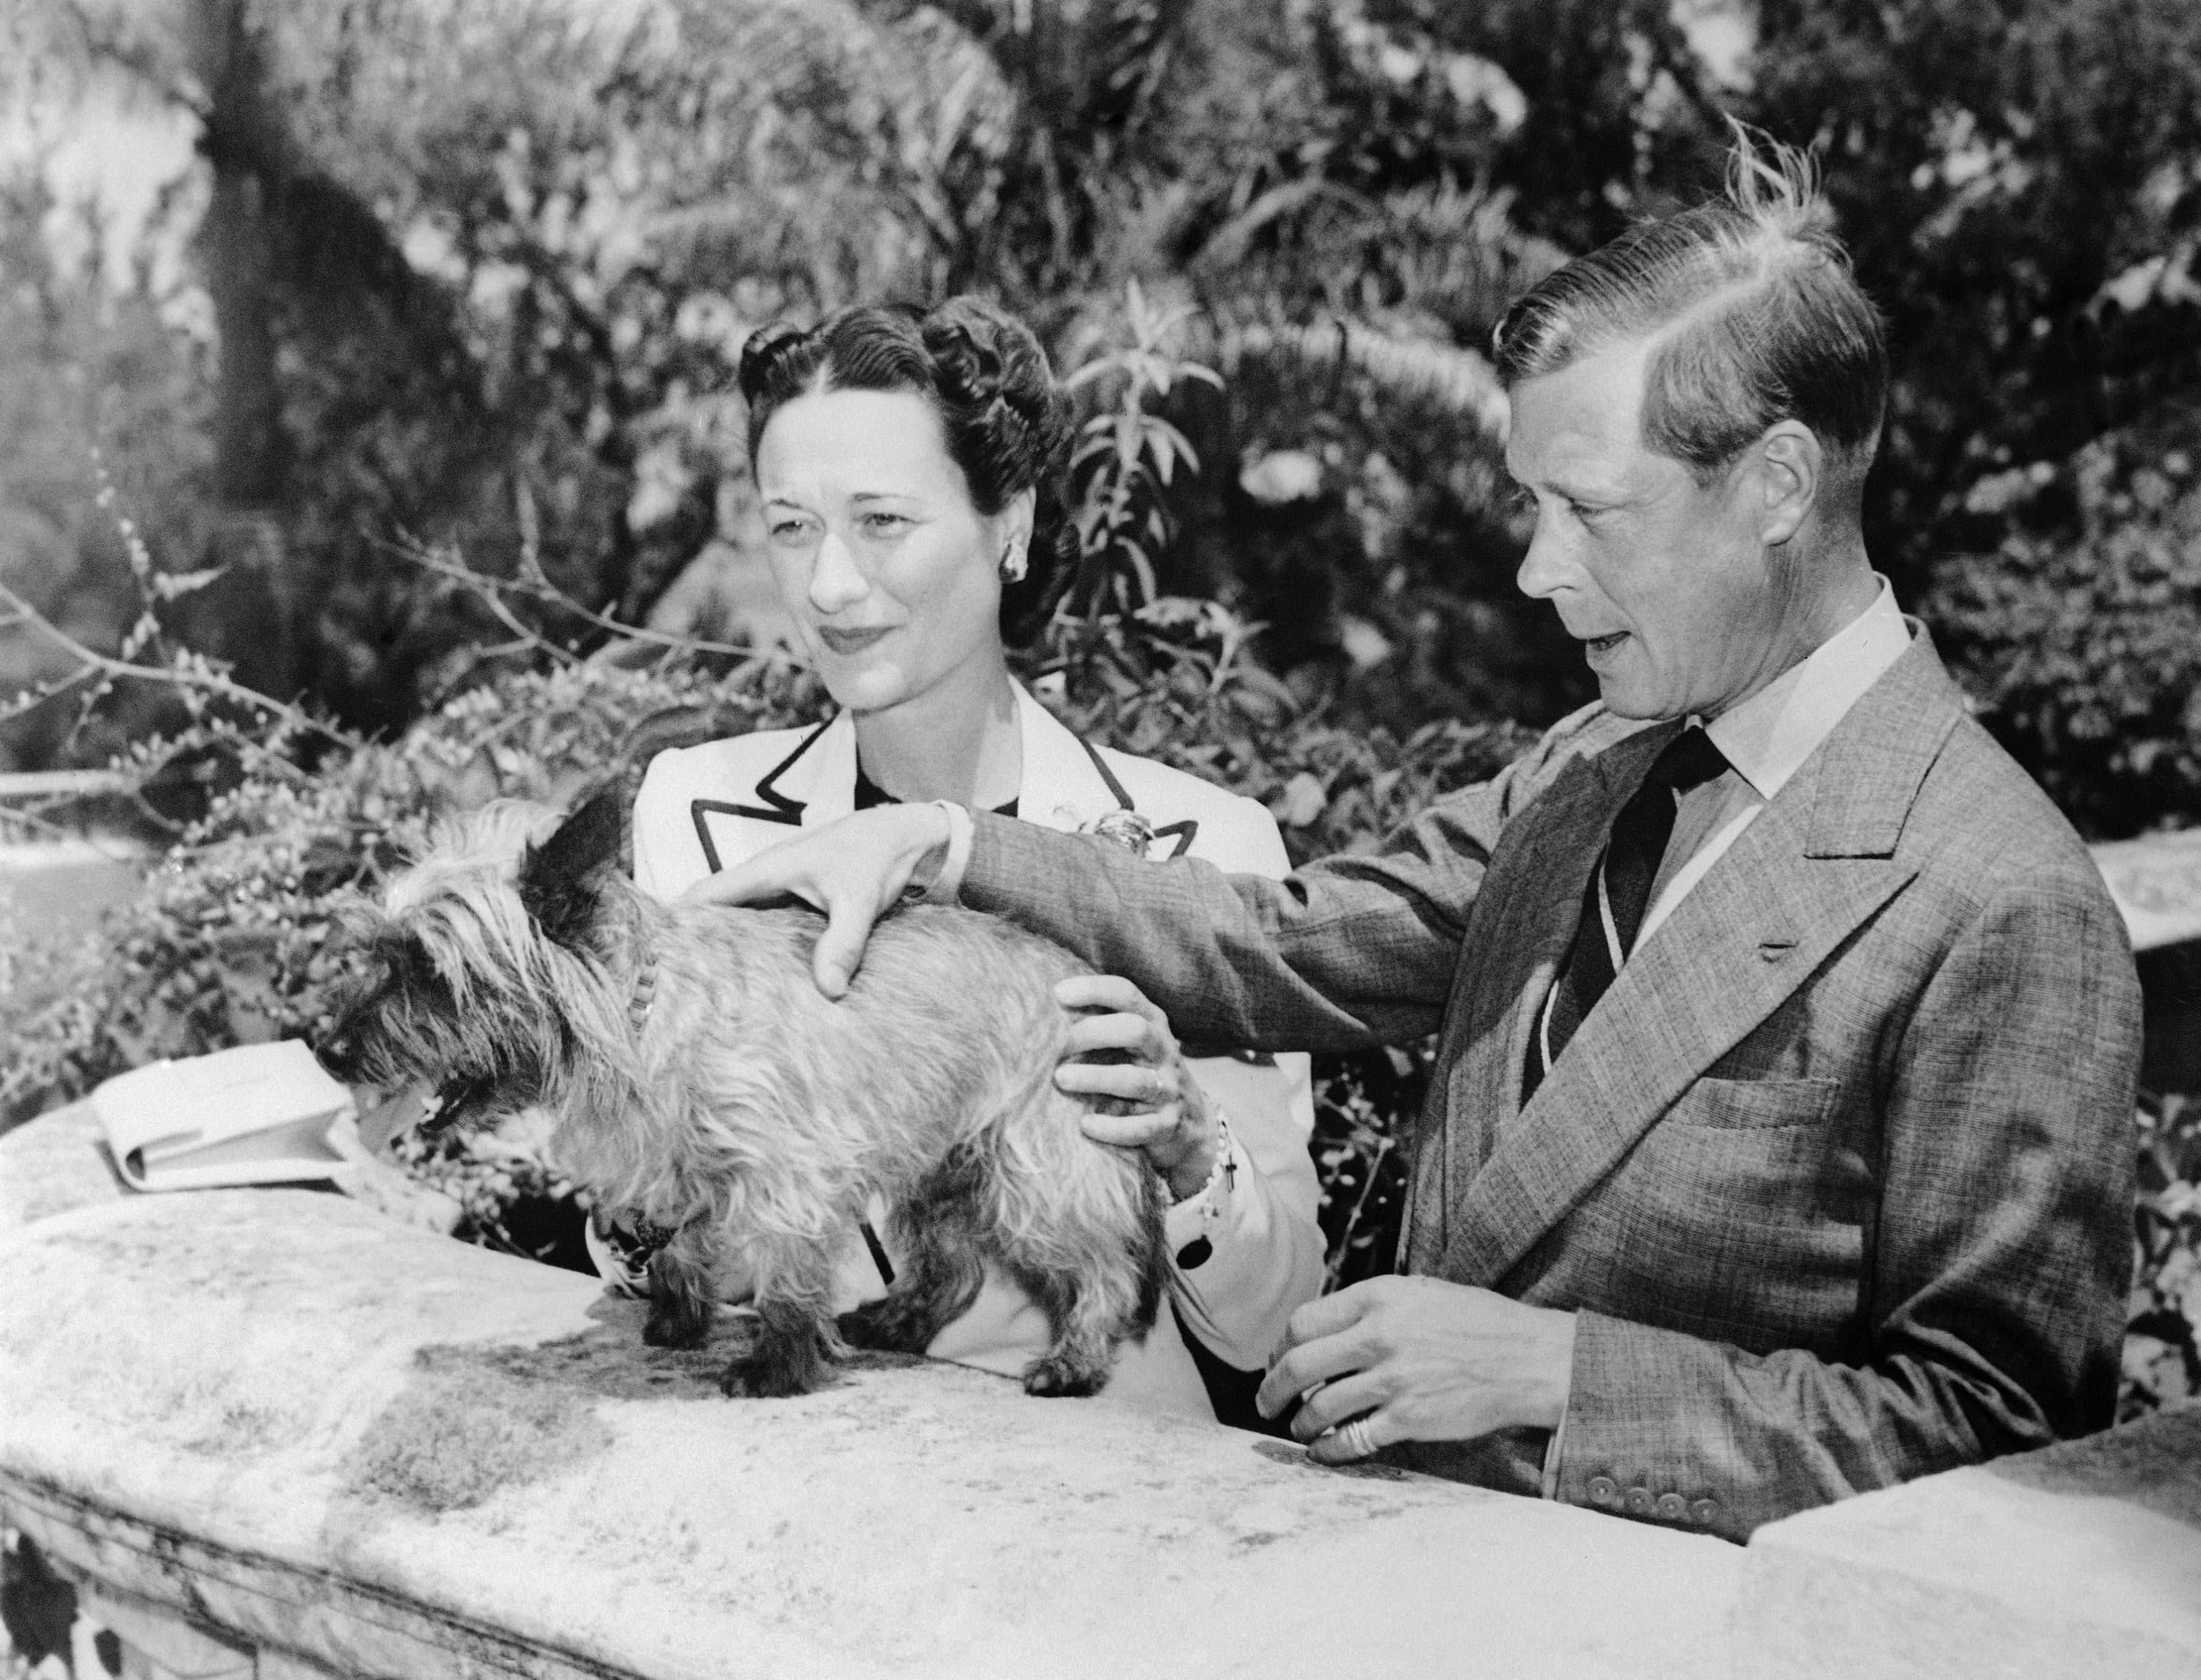 The Duke and Duchess of Windsor, Prince Edward and Wallis Simpson, with one of their pet dogs at Government House in Bermuda on Aug. 11, 1940. They are to depart for Nassau where the duke will assume his duties as governor of the Bahamas. (AP Photo)